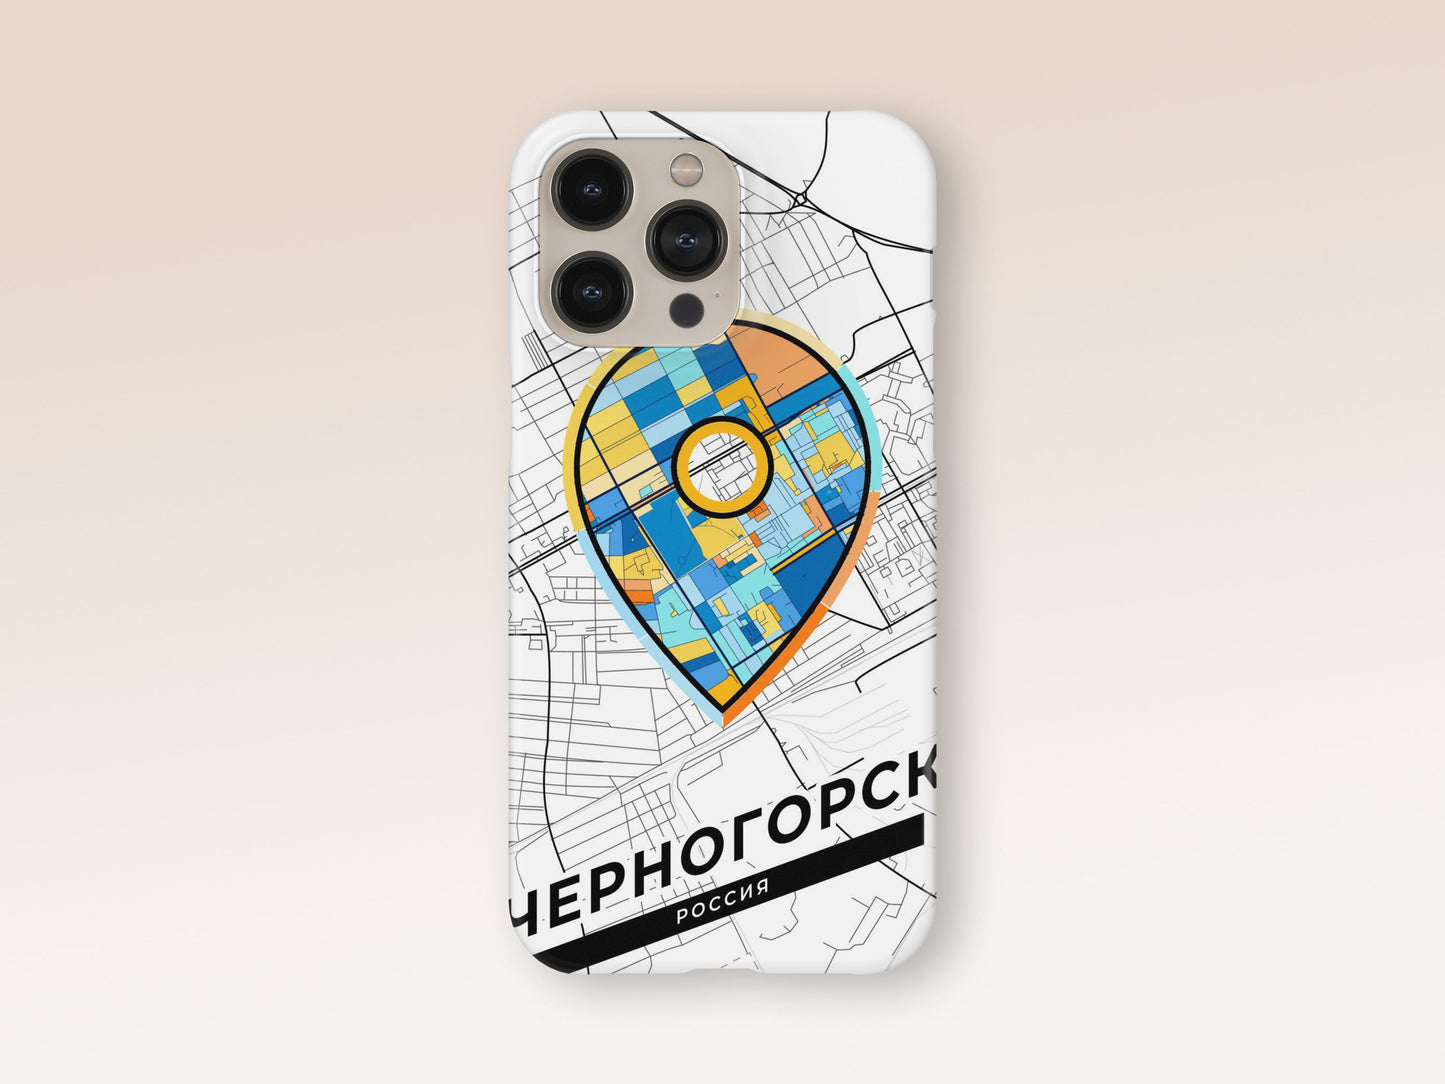 Chernogorsk Russia slim phone case with colorful icon. Birthday, wedding or housewarming gift. Couple match cases. 1